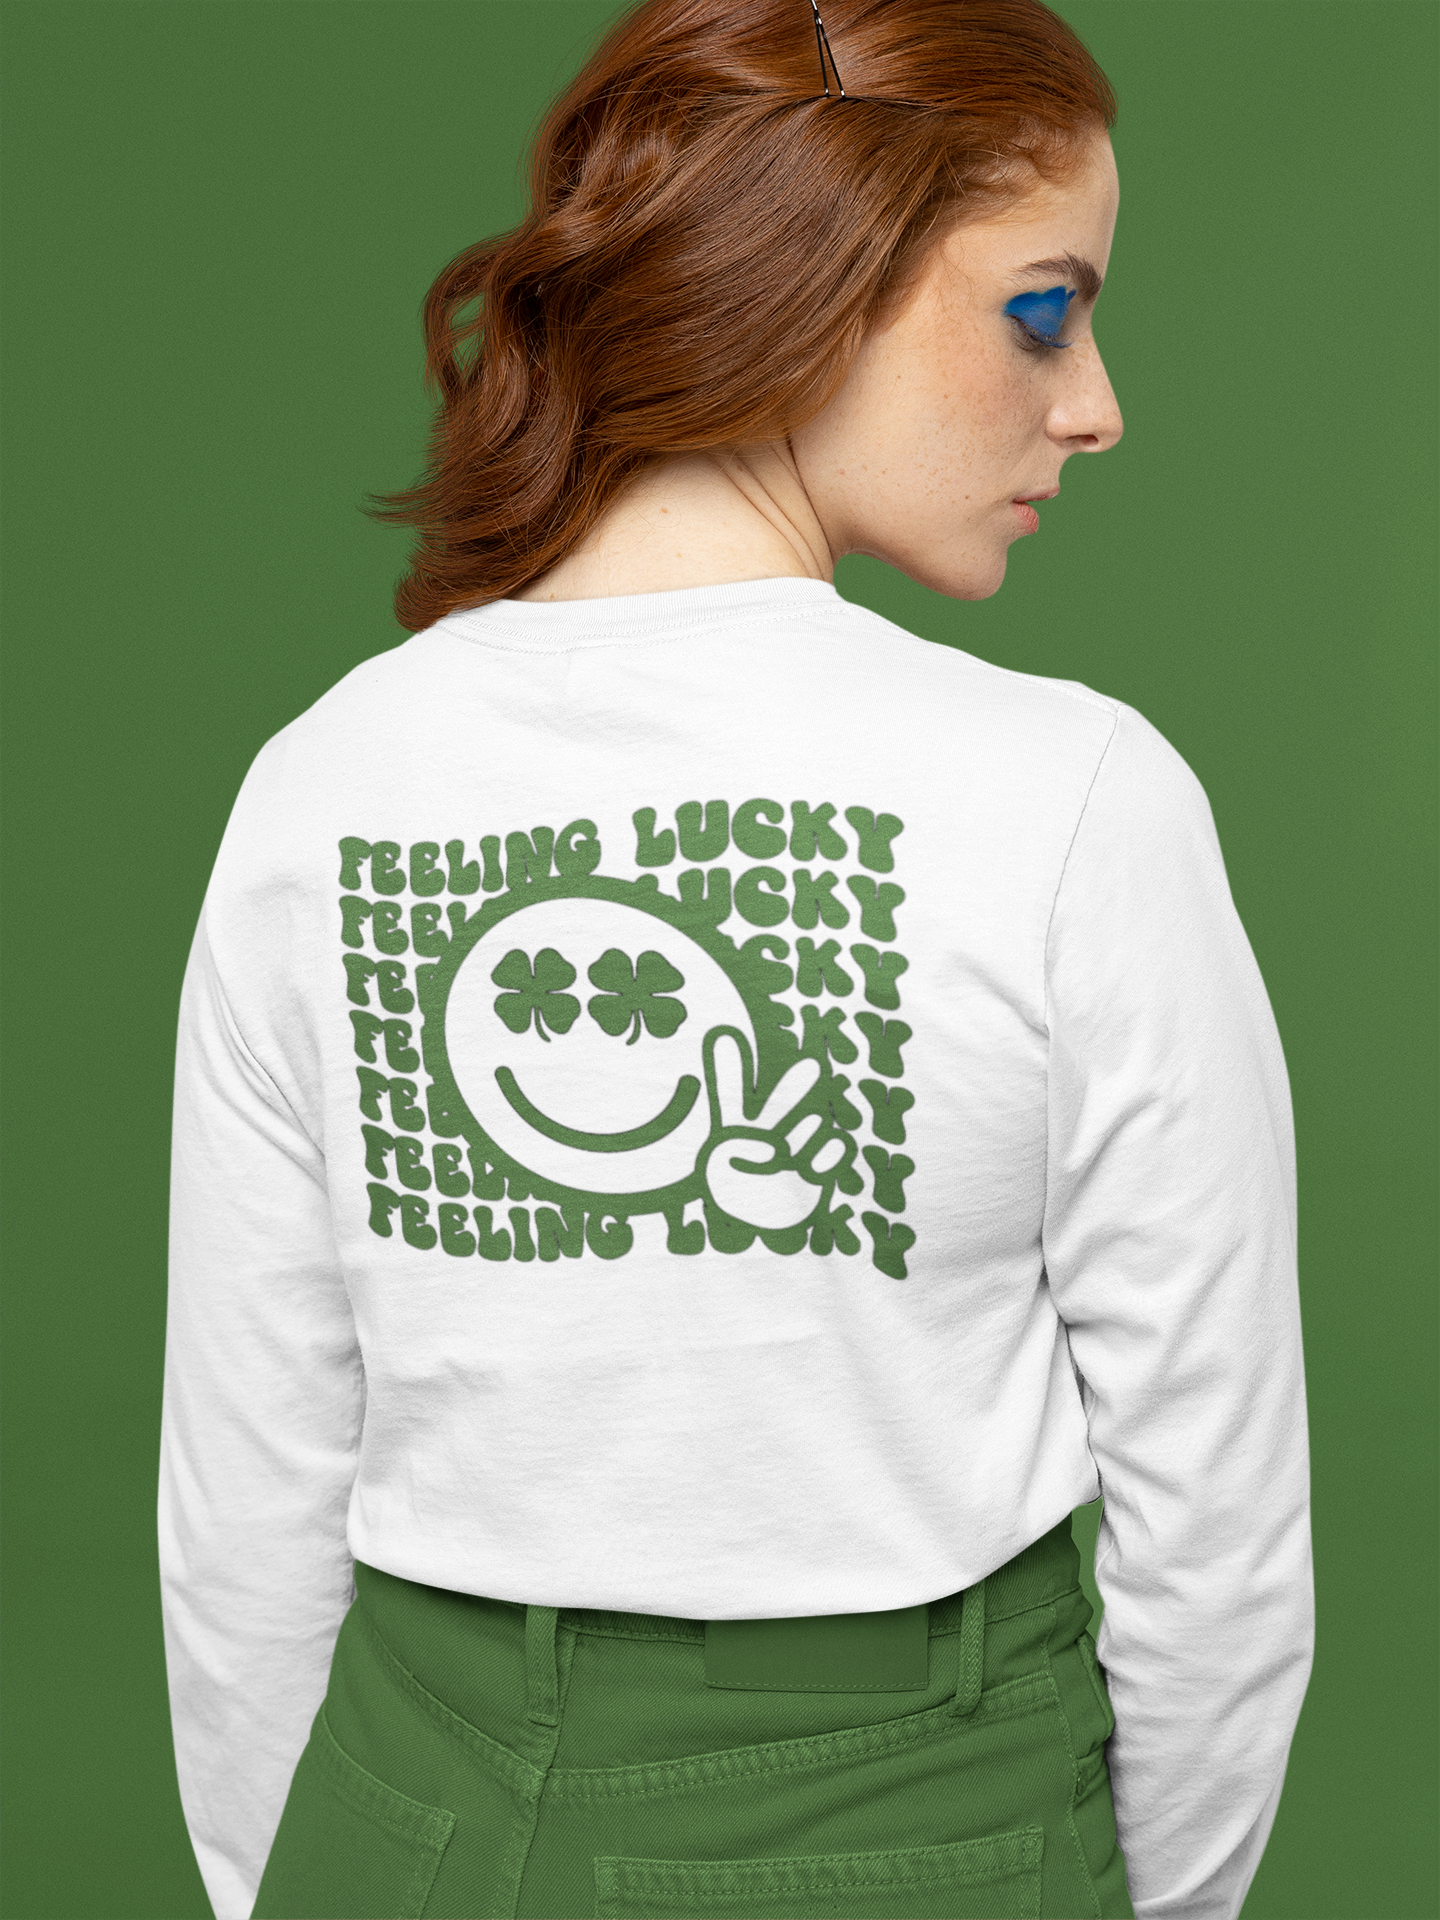 Feeling Lucky Long Sleeve Shirt in white. The back has a repetitive curvy saying "feeling lucky" with a smiley face making a peace sign with the eyes as clovers in green. The front has a four leaf clover pocket sale on the front in green. This is the back view of the shirt on a female model. Shirt is tucked into her green pants standing in front of a green background.